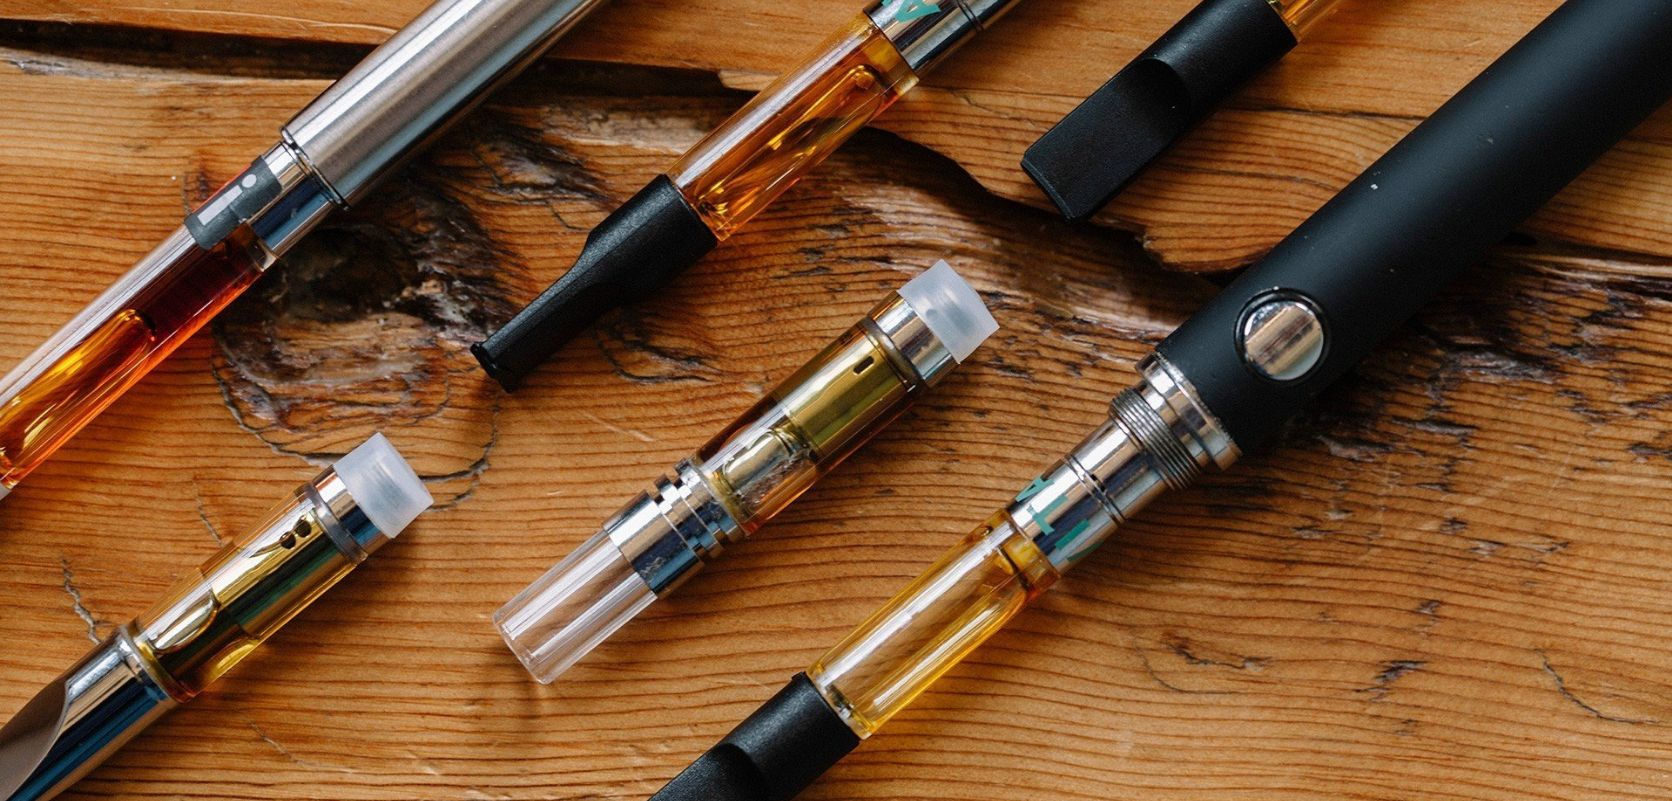 Proper maintenance and care of your dab pen cartridge is essential. It helps ensure consistent performance, extended lifespan, and guarantees a safe vaping experience.